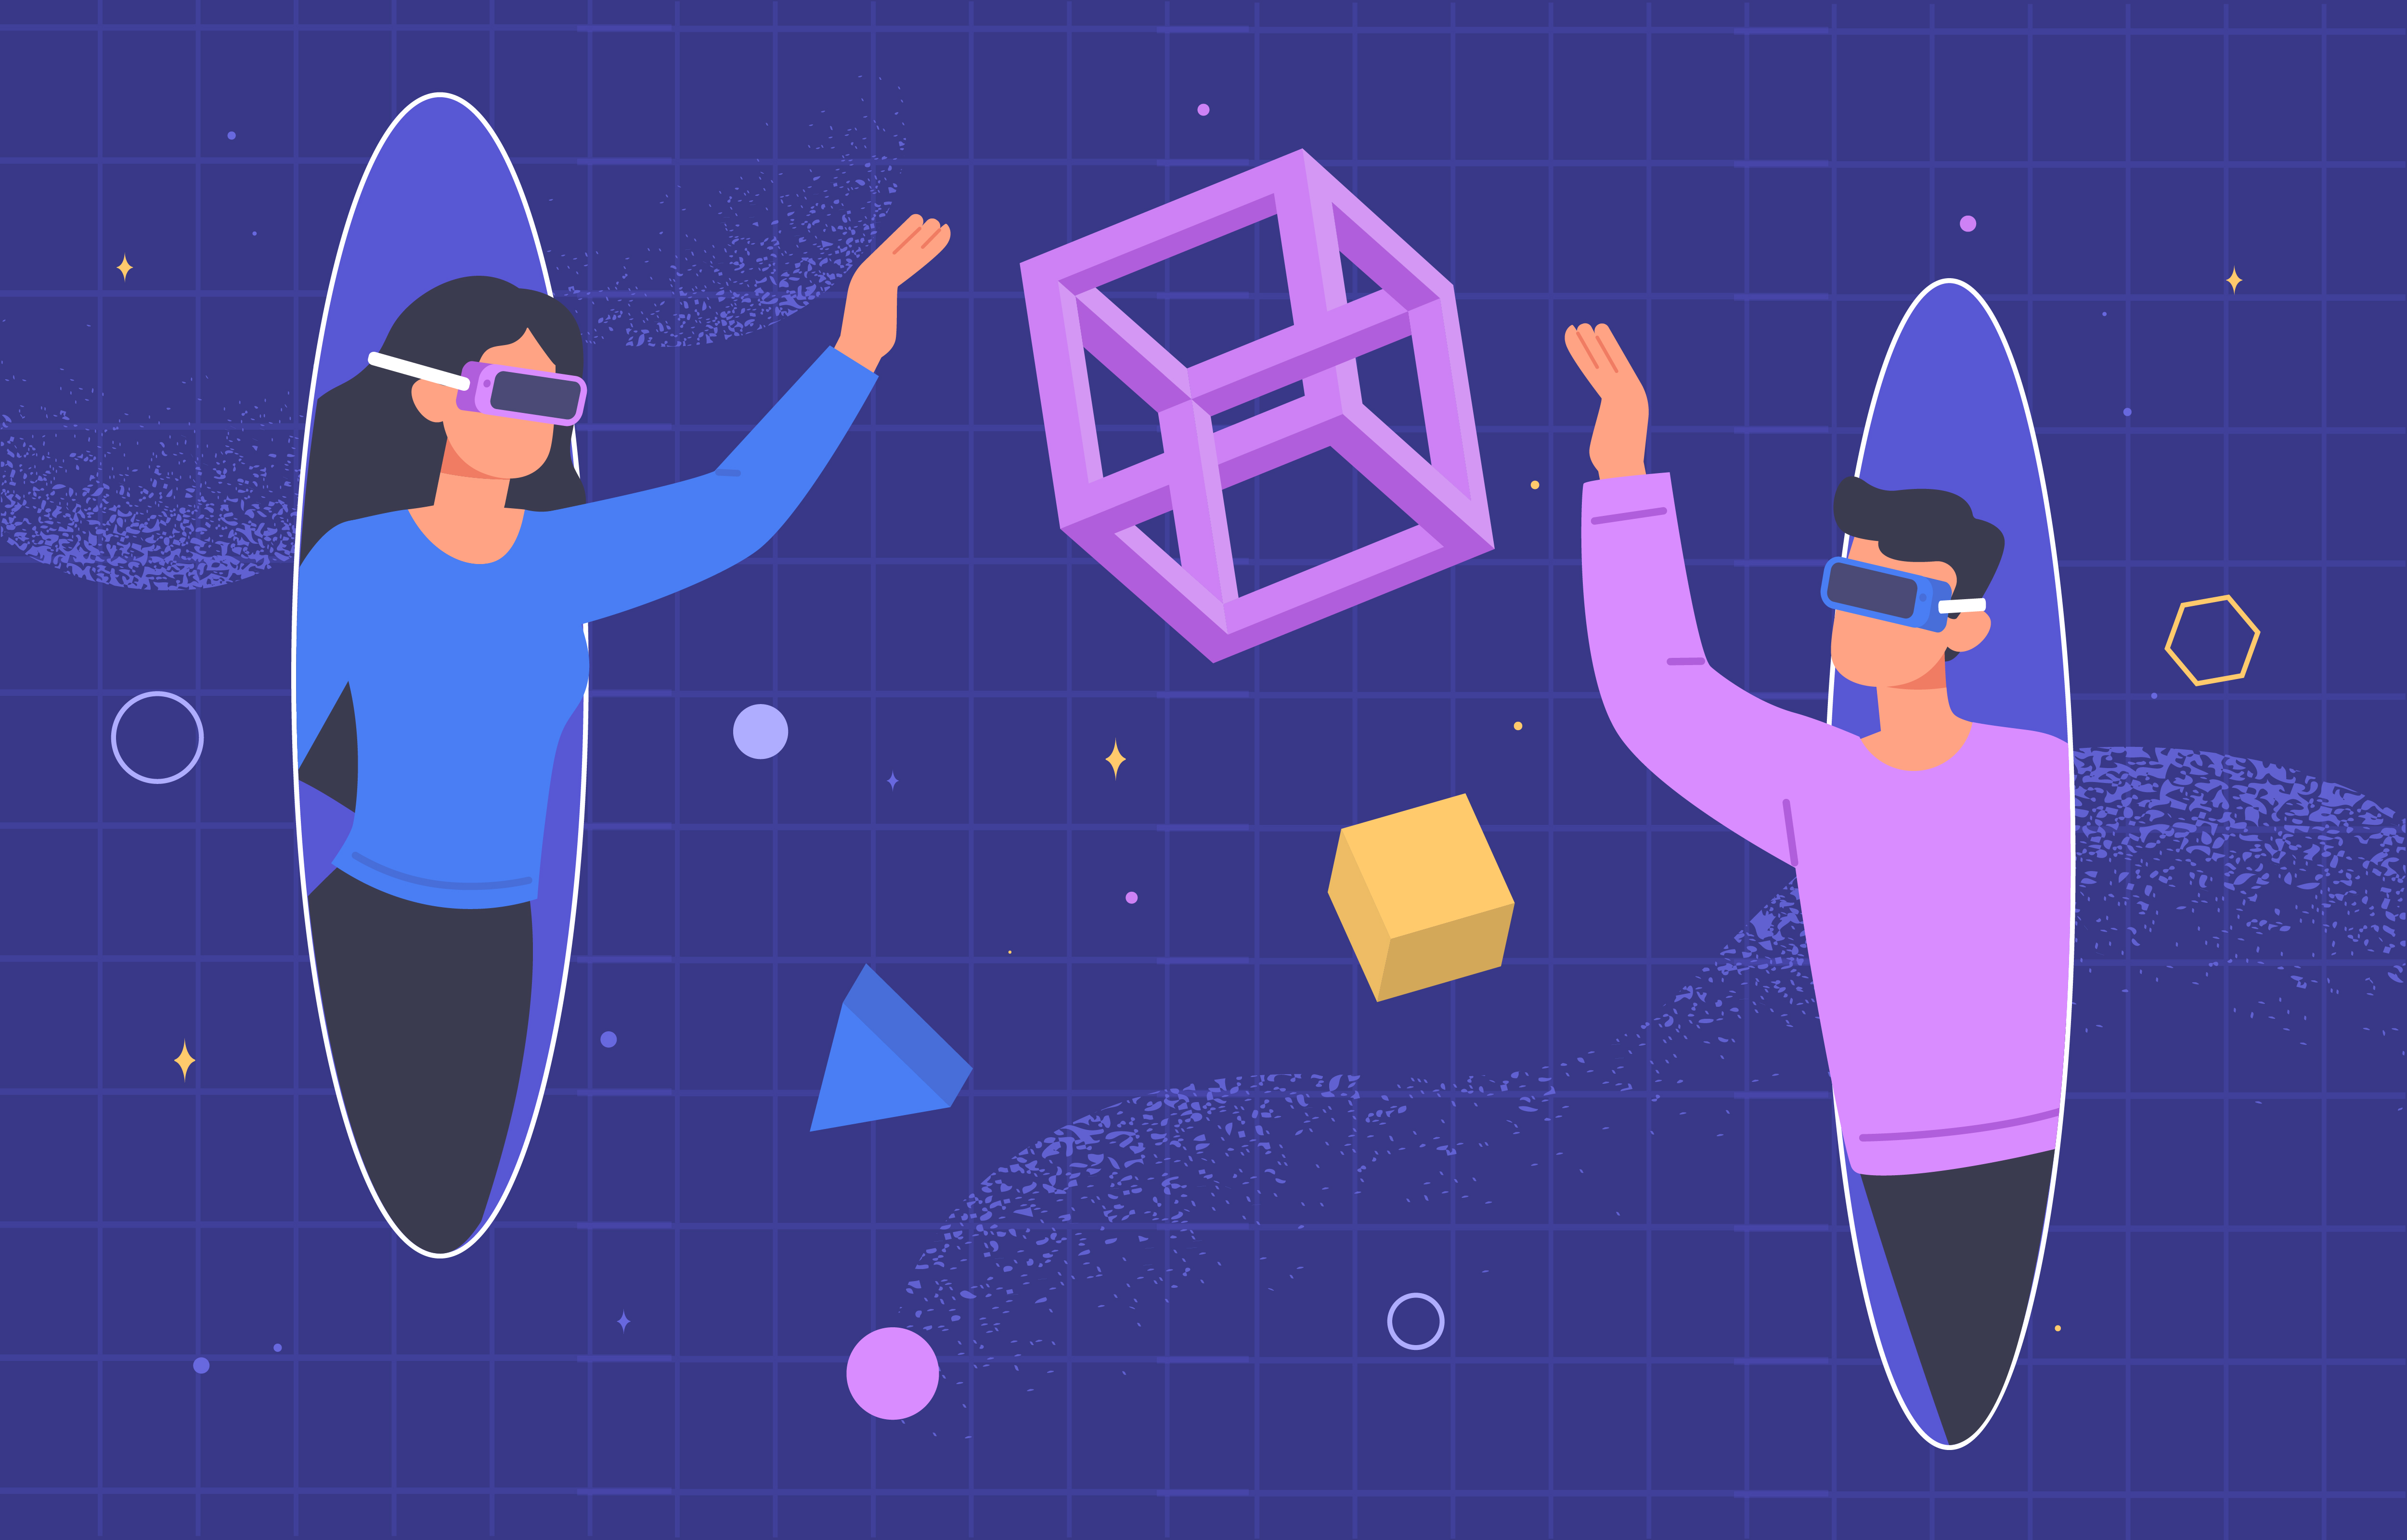 Man and Woman with VR glasses exploring a dimension of volumetric figures through portals